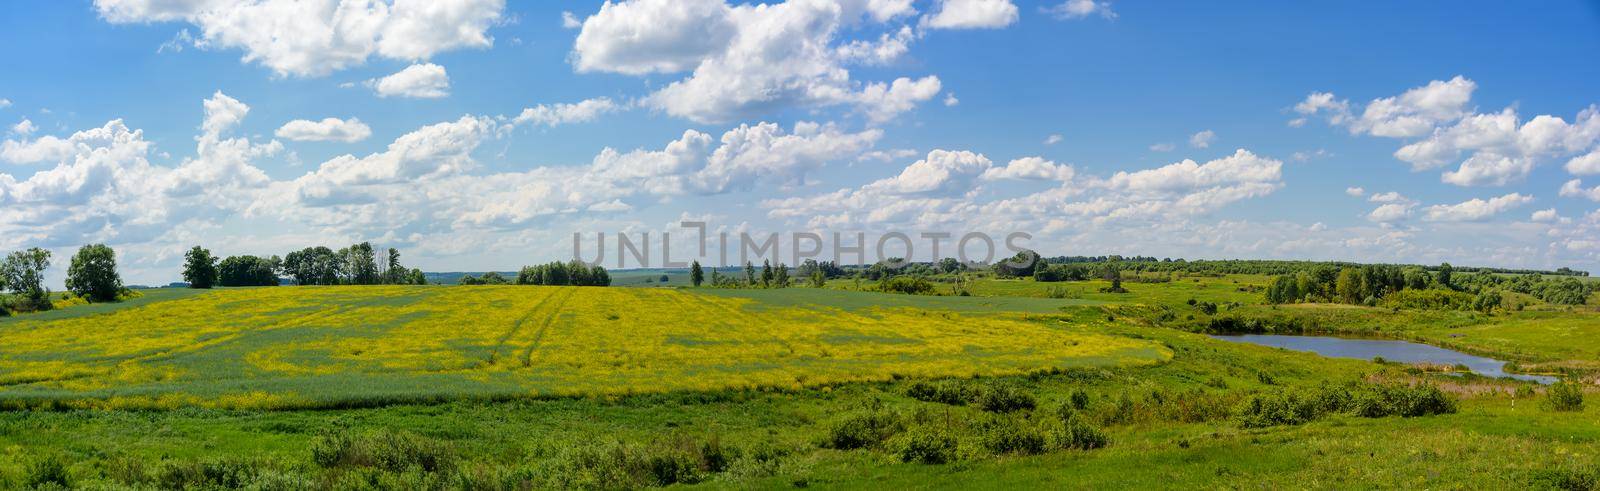 Panorama of grassland with yellow flowers, field and meadow, lake and green trees. Blue sky with white clouds